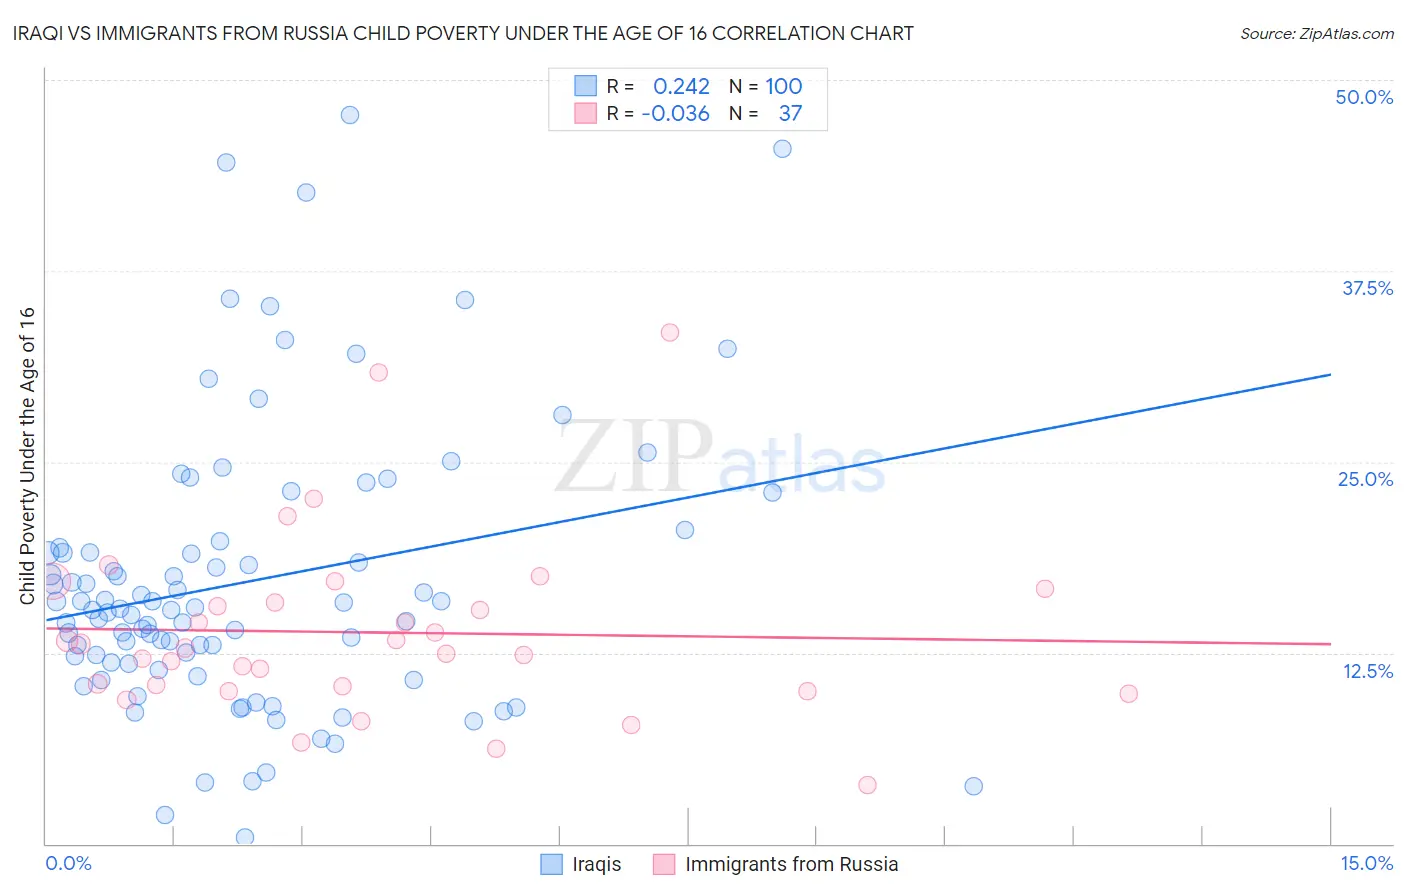 Iraqi vs Immigrants from Russia Child Poverty Under the Age of 16